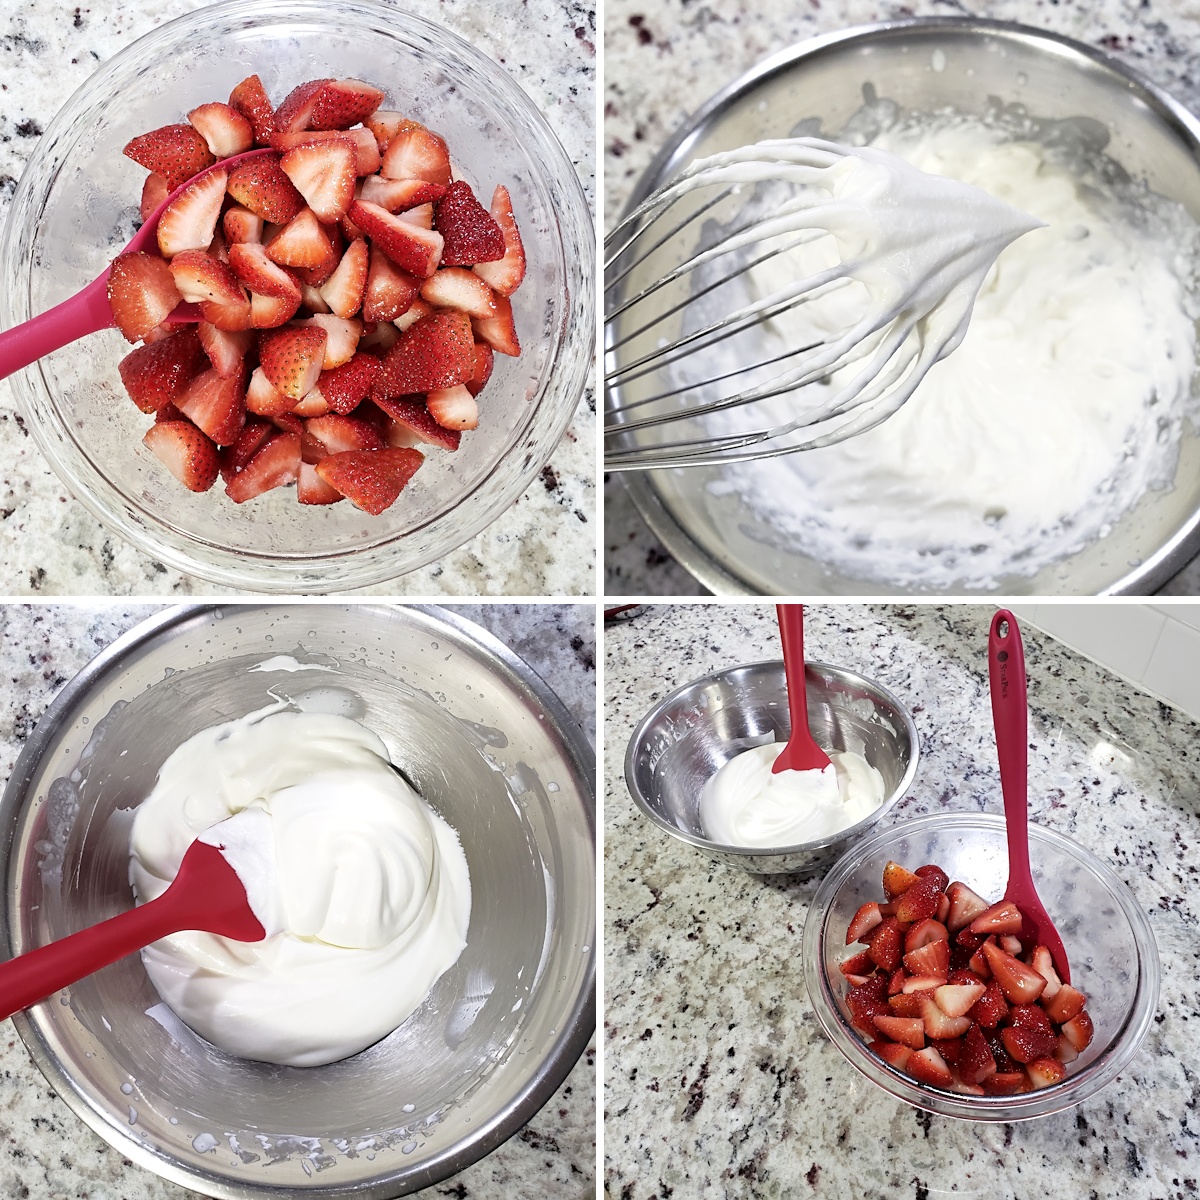 Collage of preparation photos, including a bowl of strawberries, and making whipped cream.